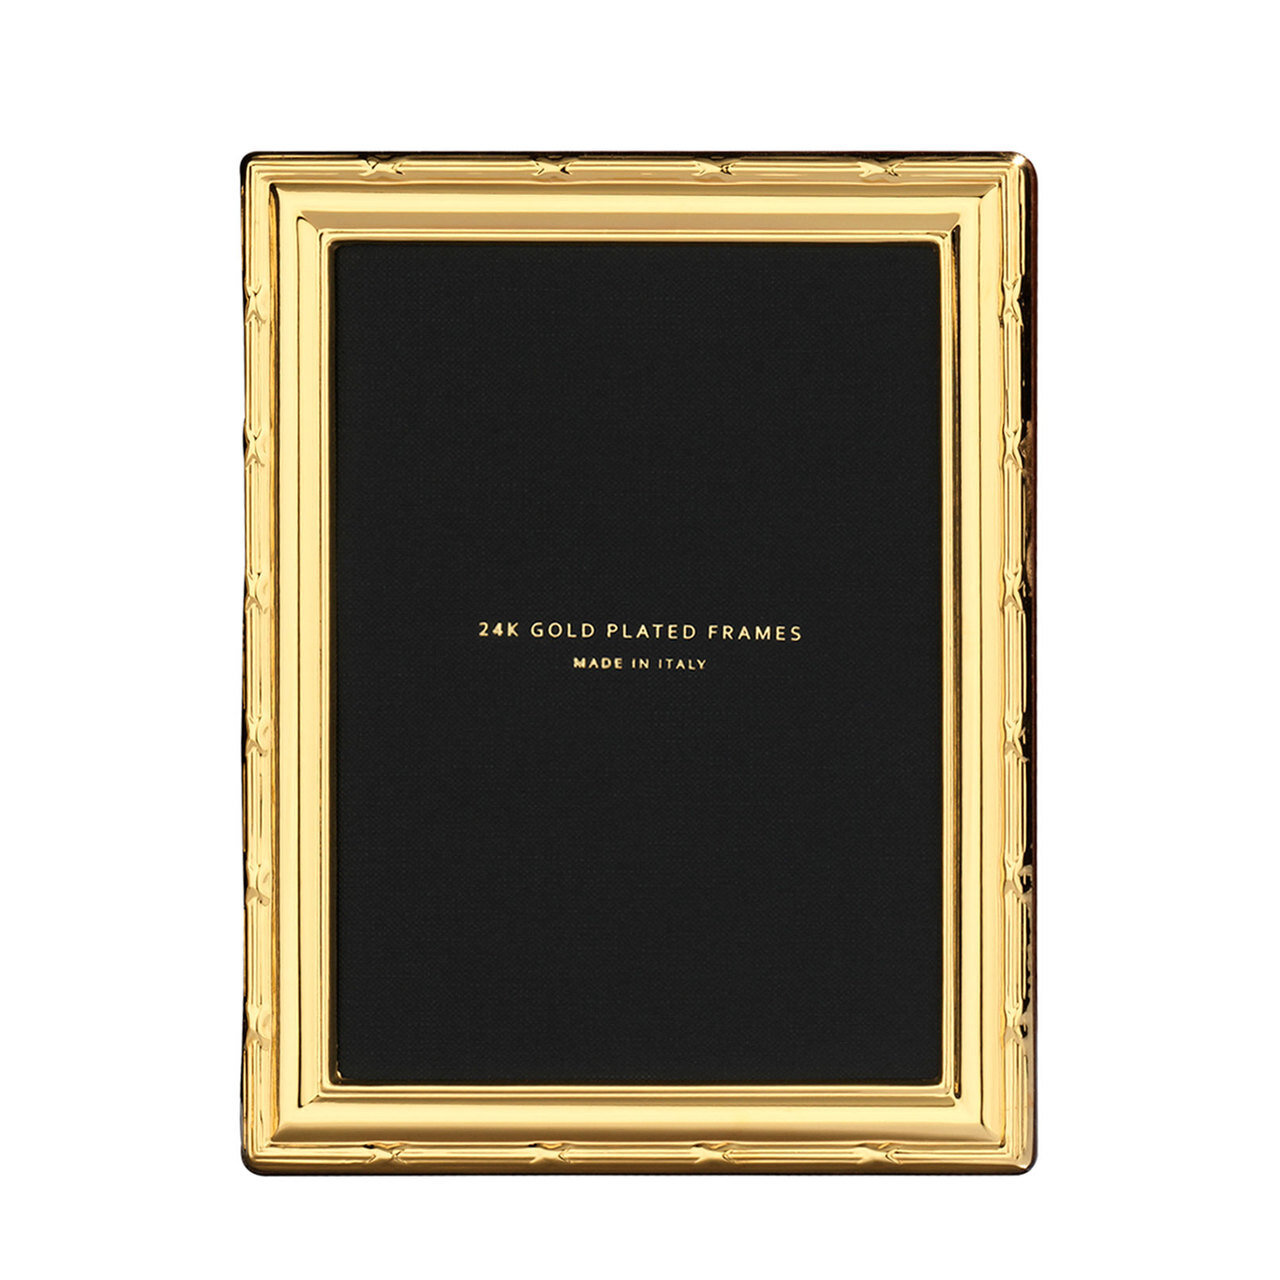 Cunill Ribbon 8 x 10 Inch Picture Frame - 24k Gold Plated 0.5 Microns